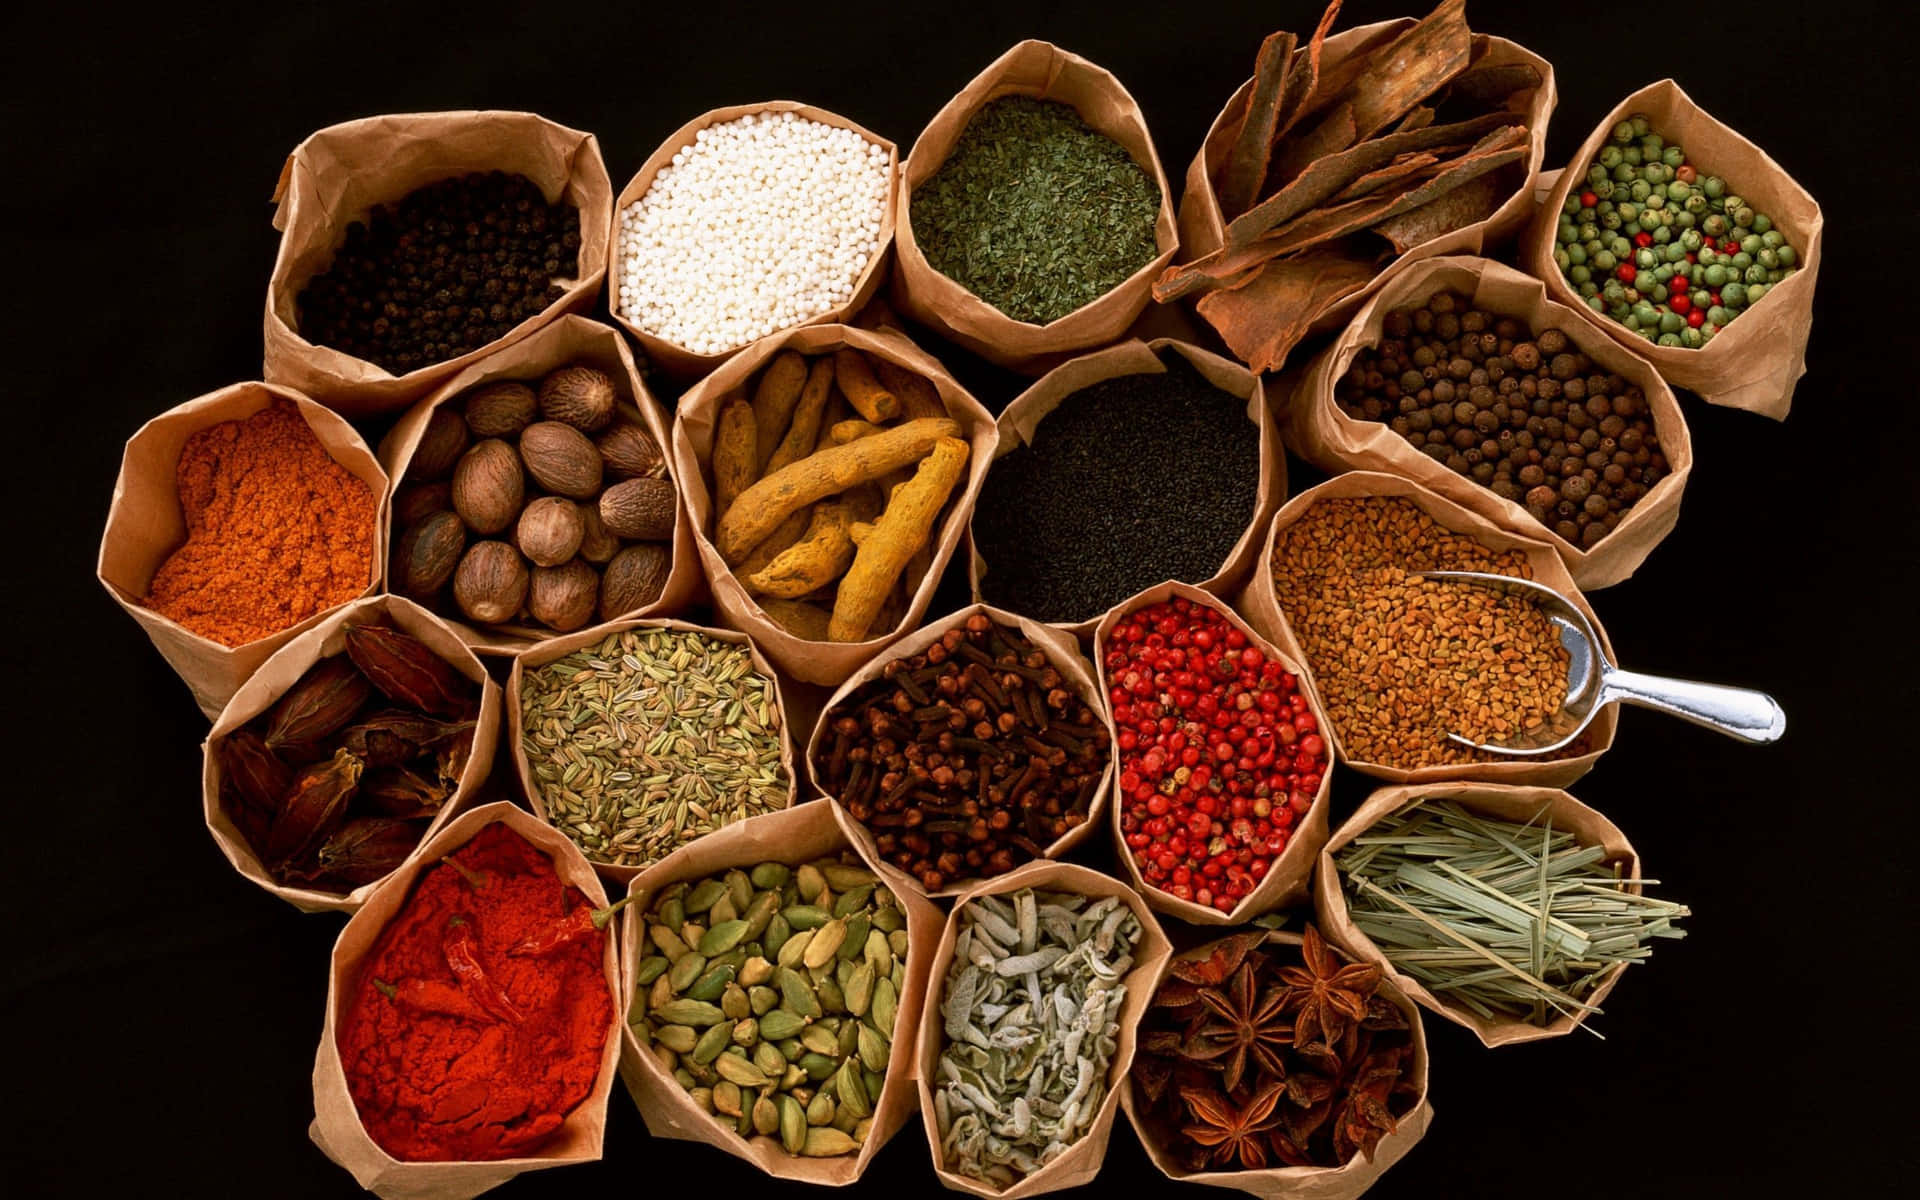 A Variety Of Spices In A Bag